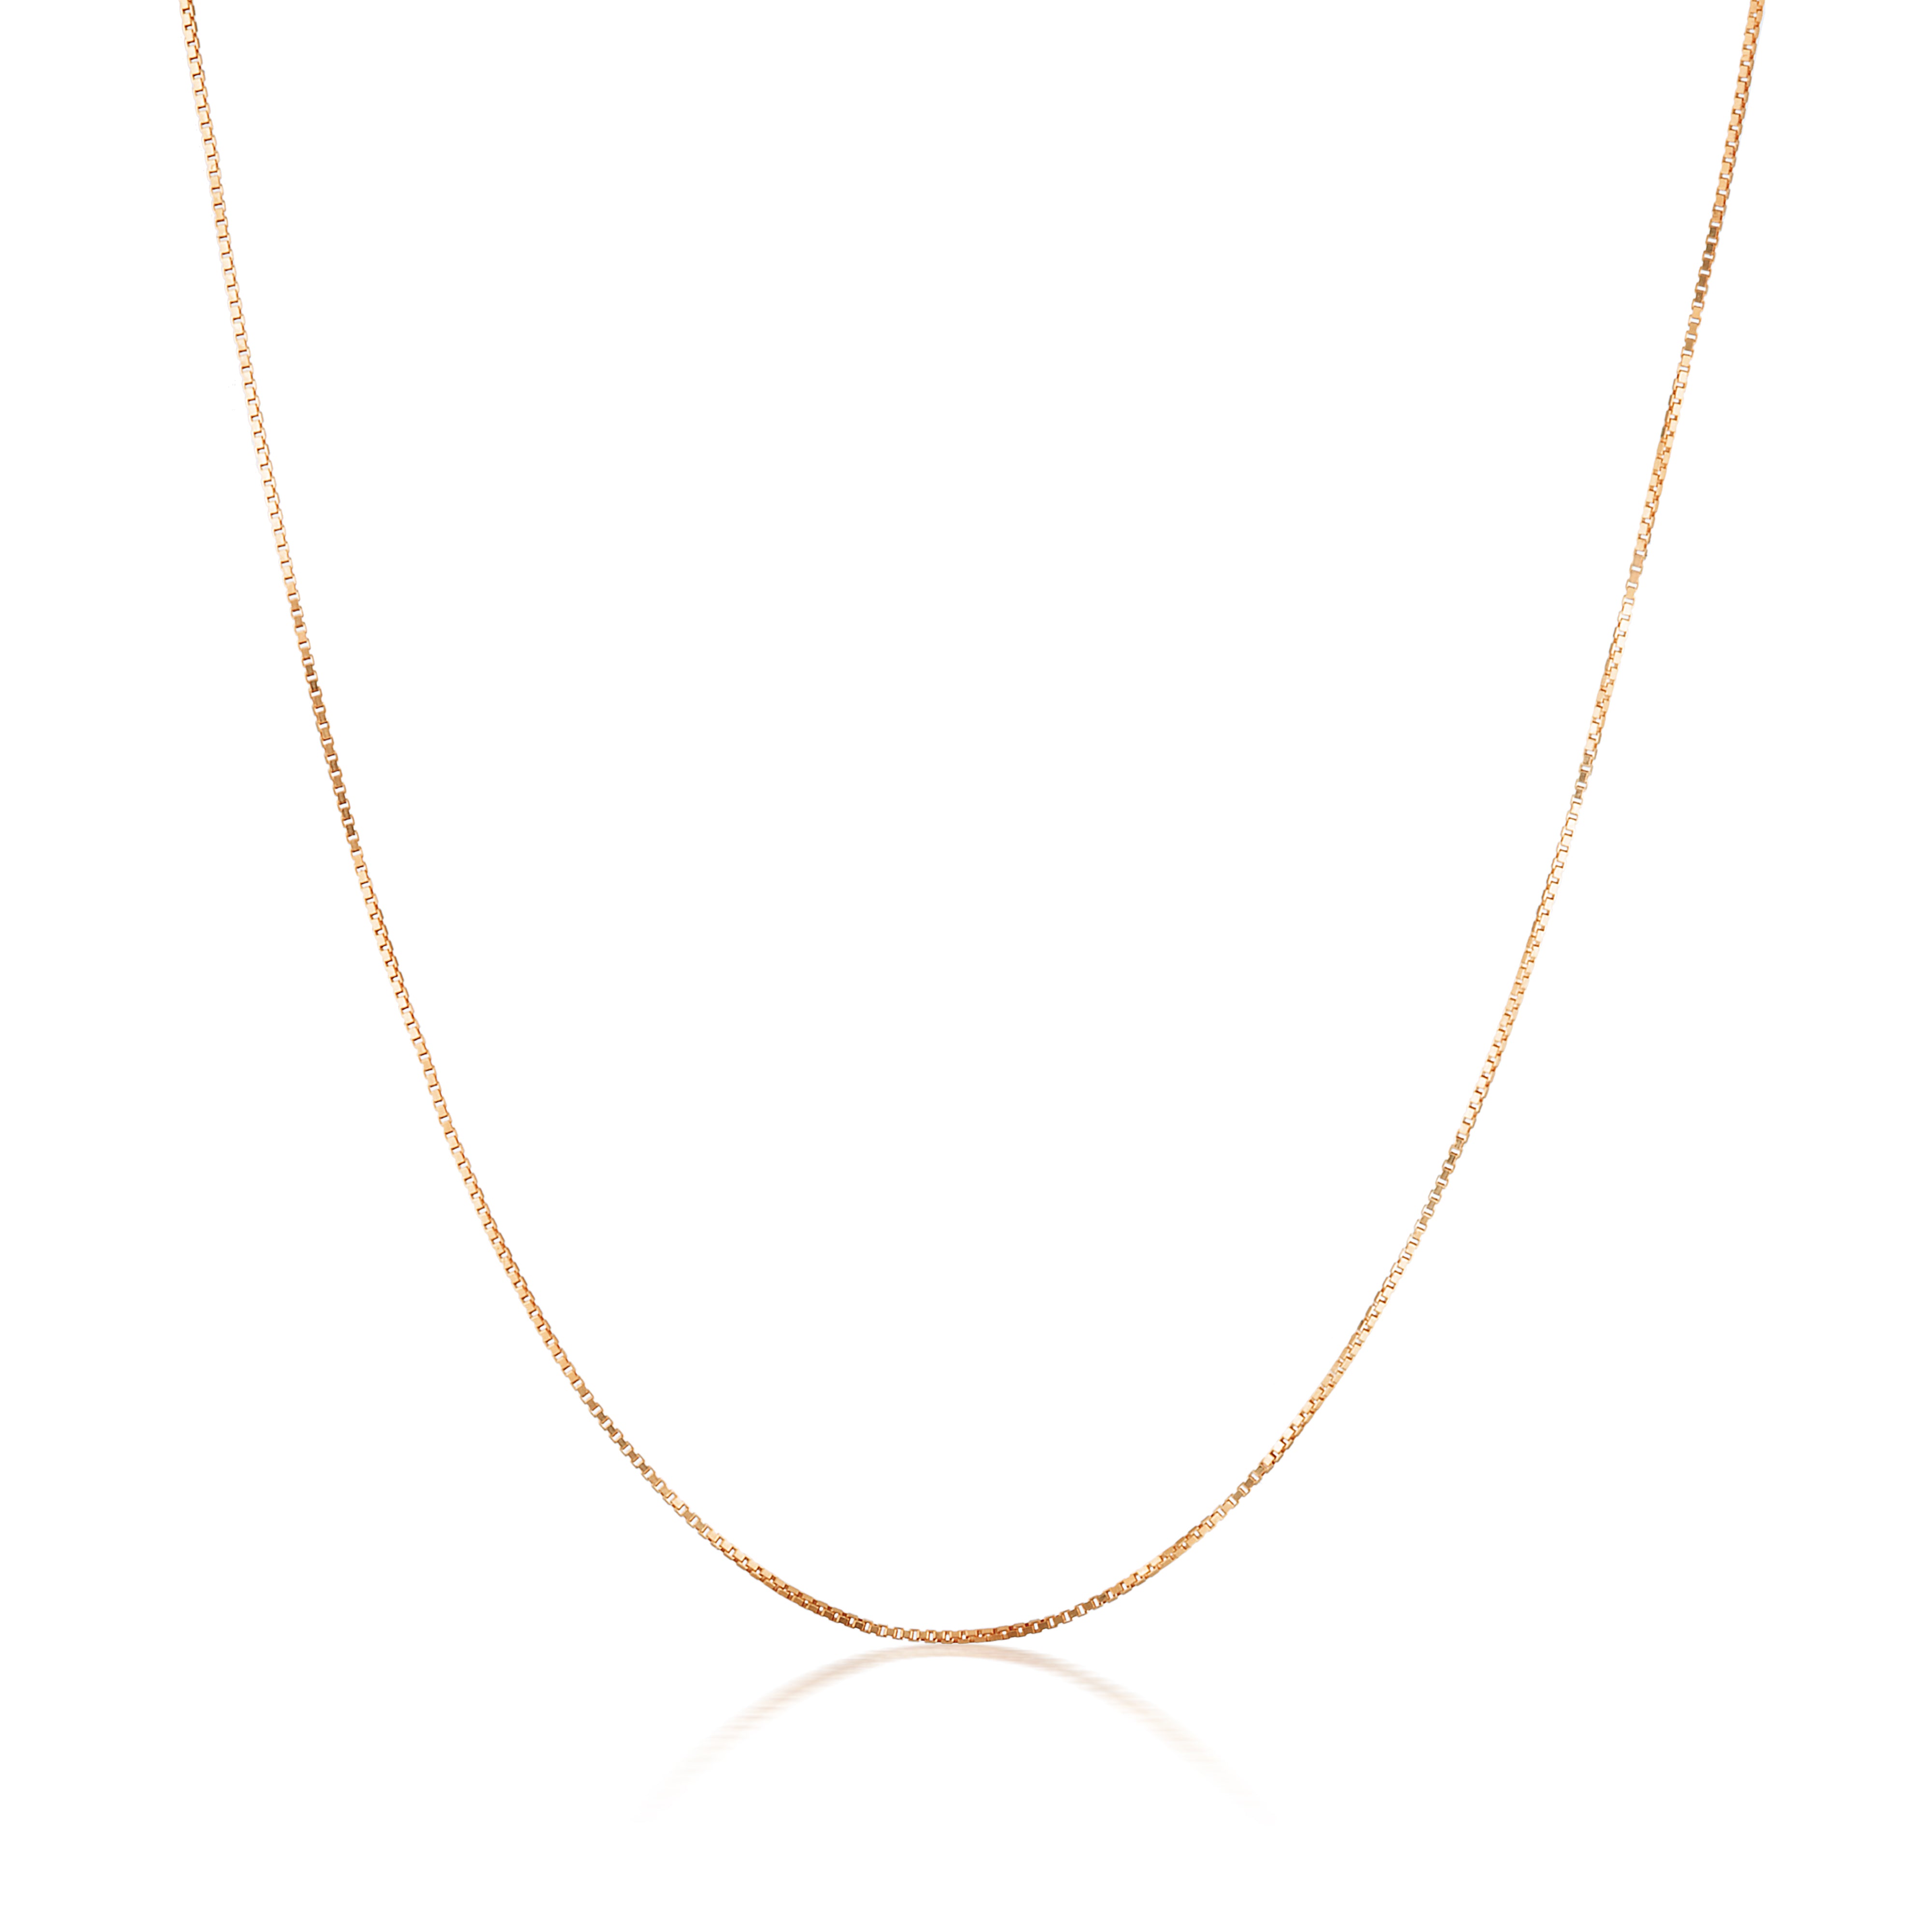 ROSE GOLD 0.5MM BOX CHAIN 42+3CM EXTENSION IN 9CT